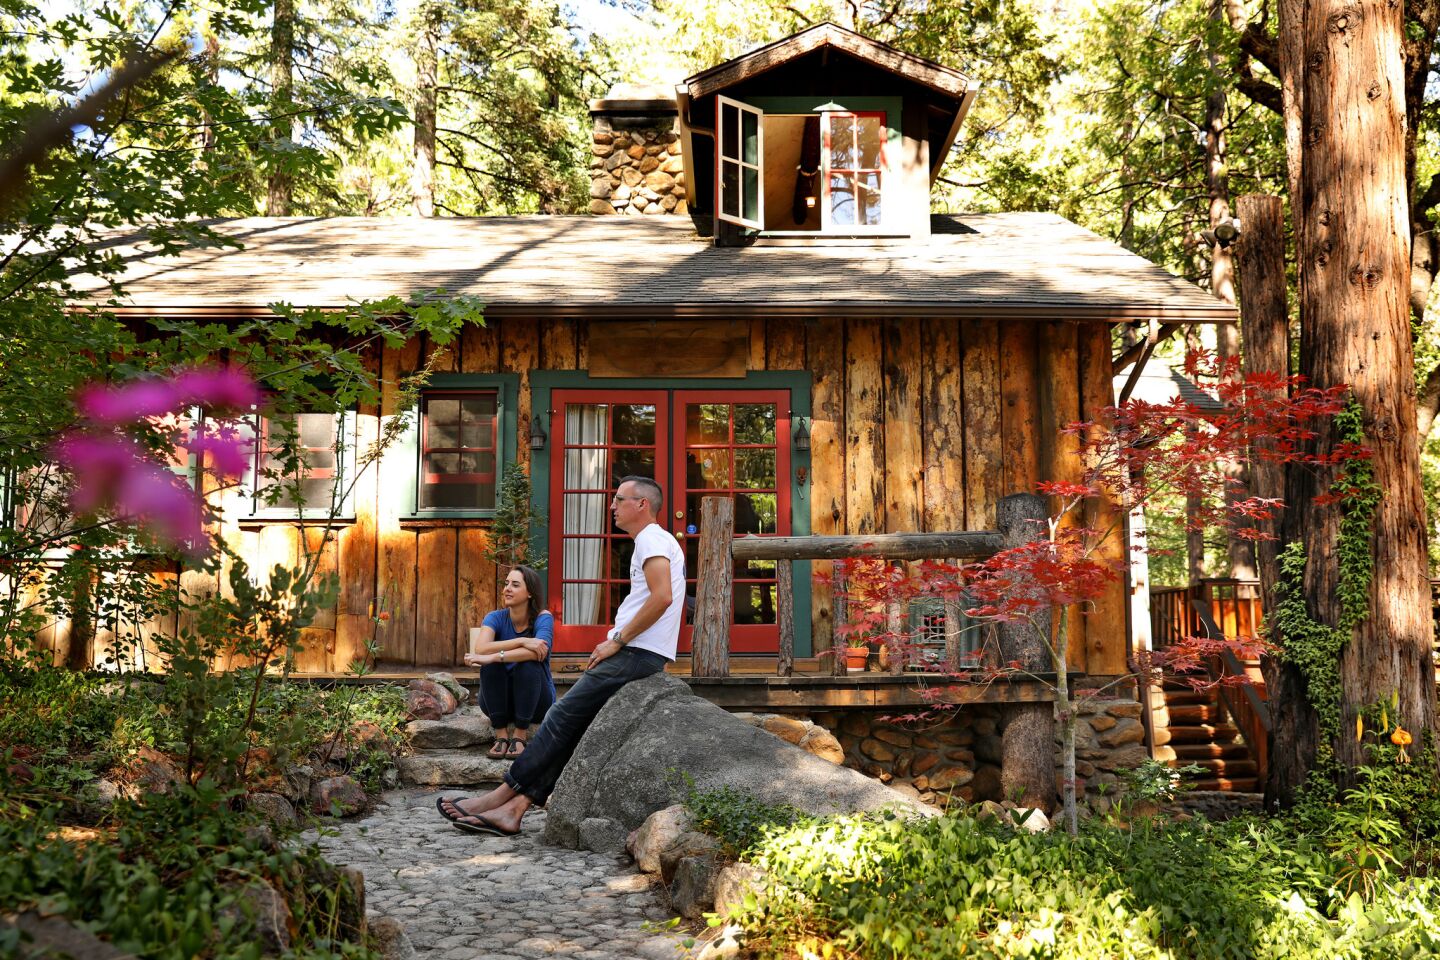 The 2-acre Idyllwild property had been extensively rehabbed by a previous owner.